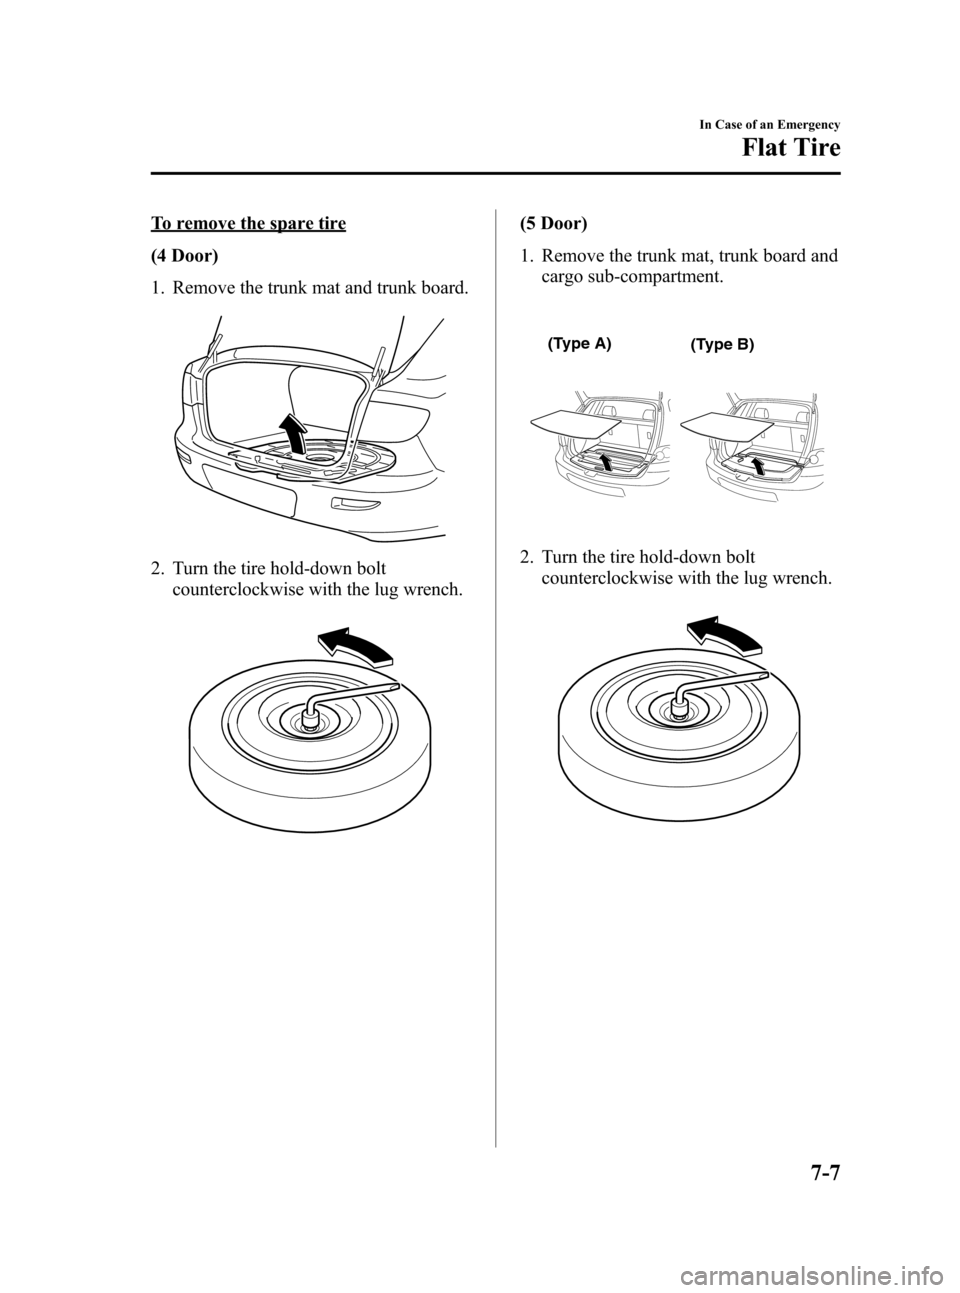 MAZDA MODEL 3 HATCHBACK 2008  Owners Manual (in English) Black plate (251,1)
To remove the spare tire
(4 Door)
1. Remove the trunk mat and trunk board.
2. Turn the tire hold-down bolt
counterclockwise with the lug wrench.
(5 Door)
1. Remove the trunk mat, t